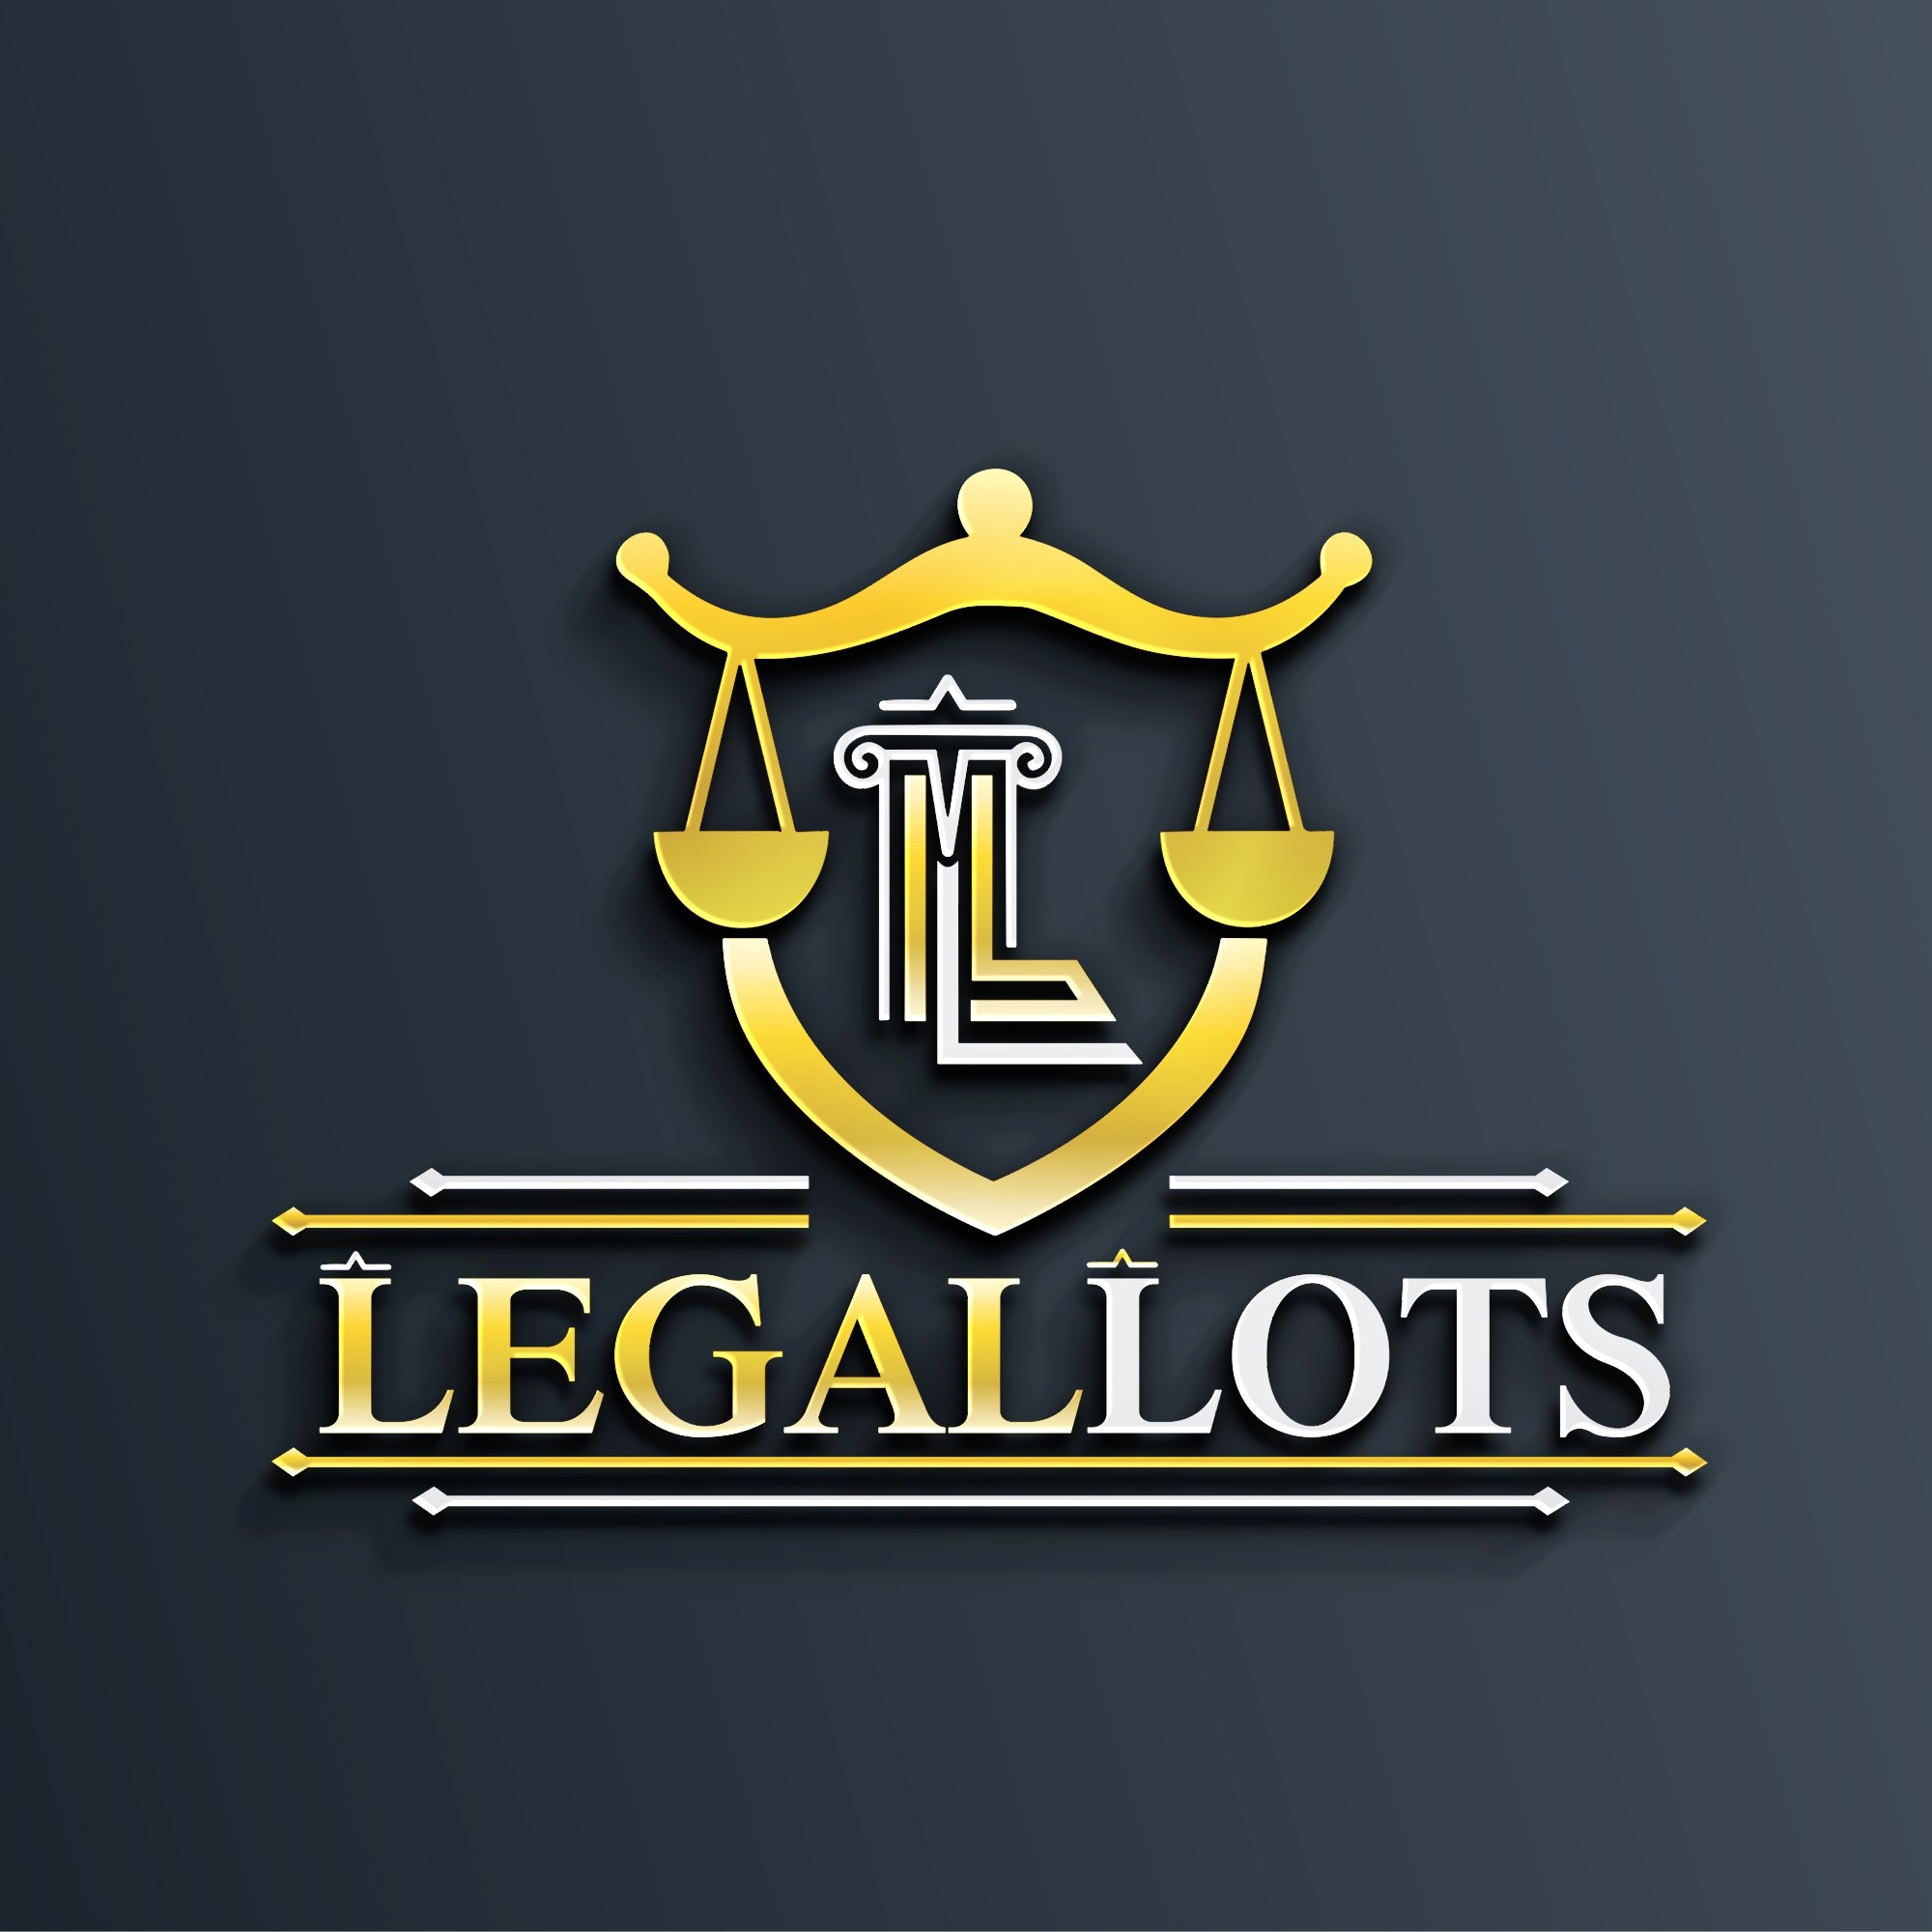 LegalLots Law Firm |Legal Services|Professional Services